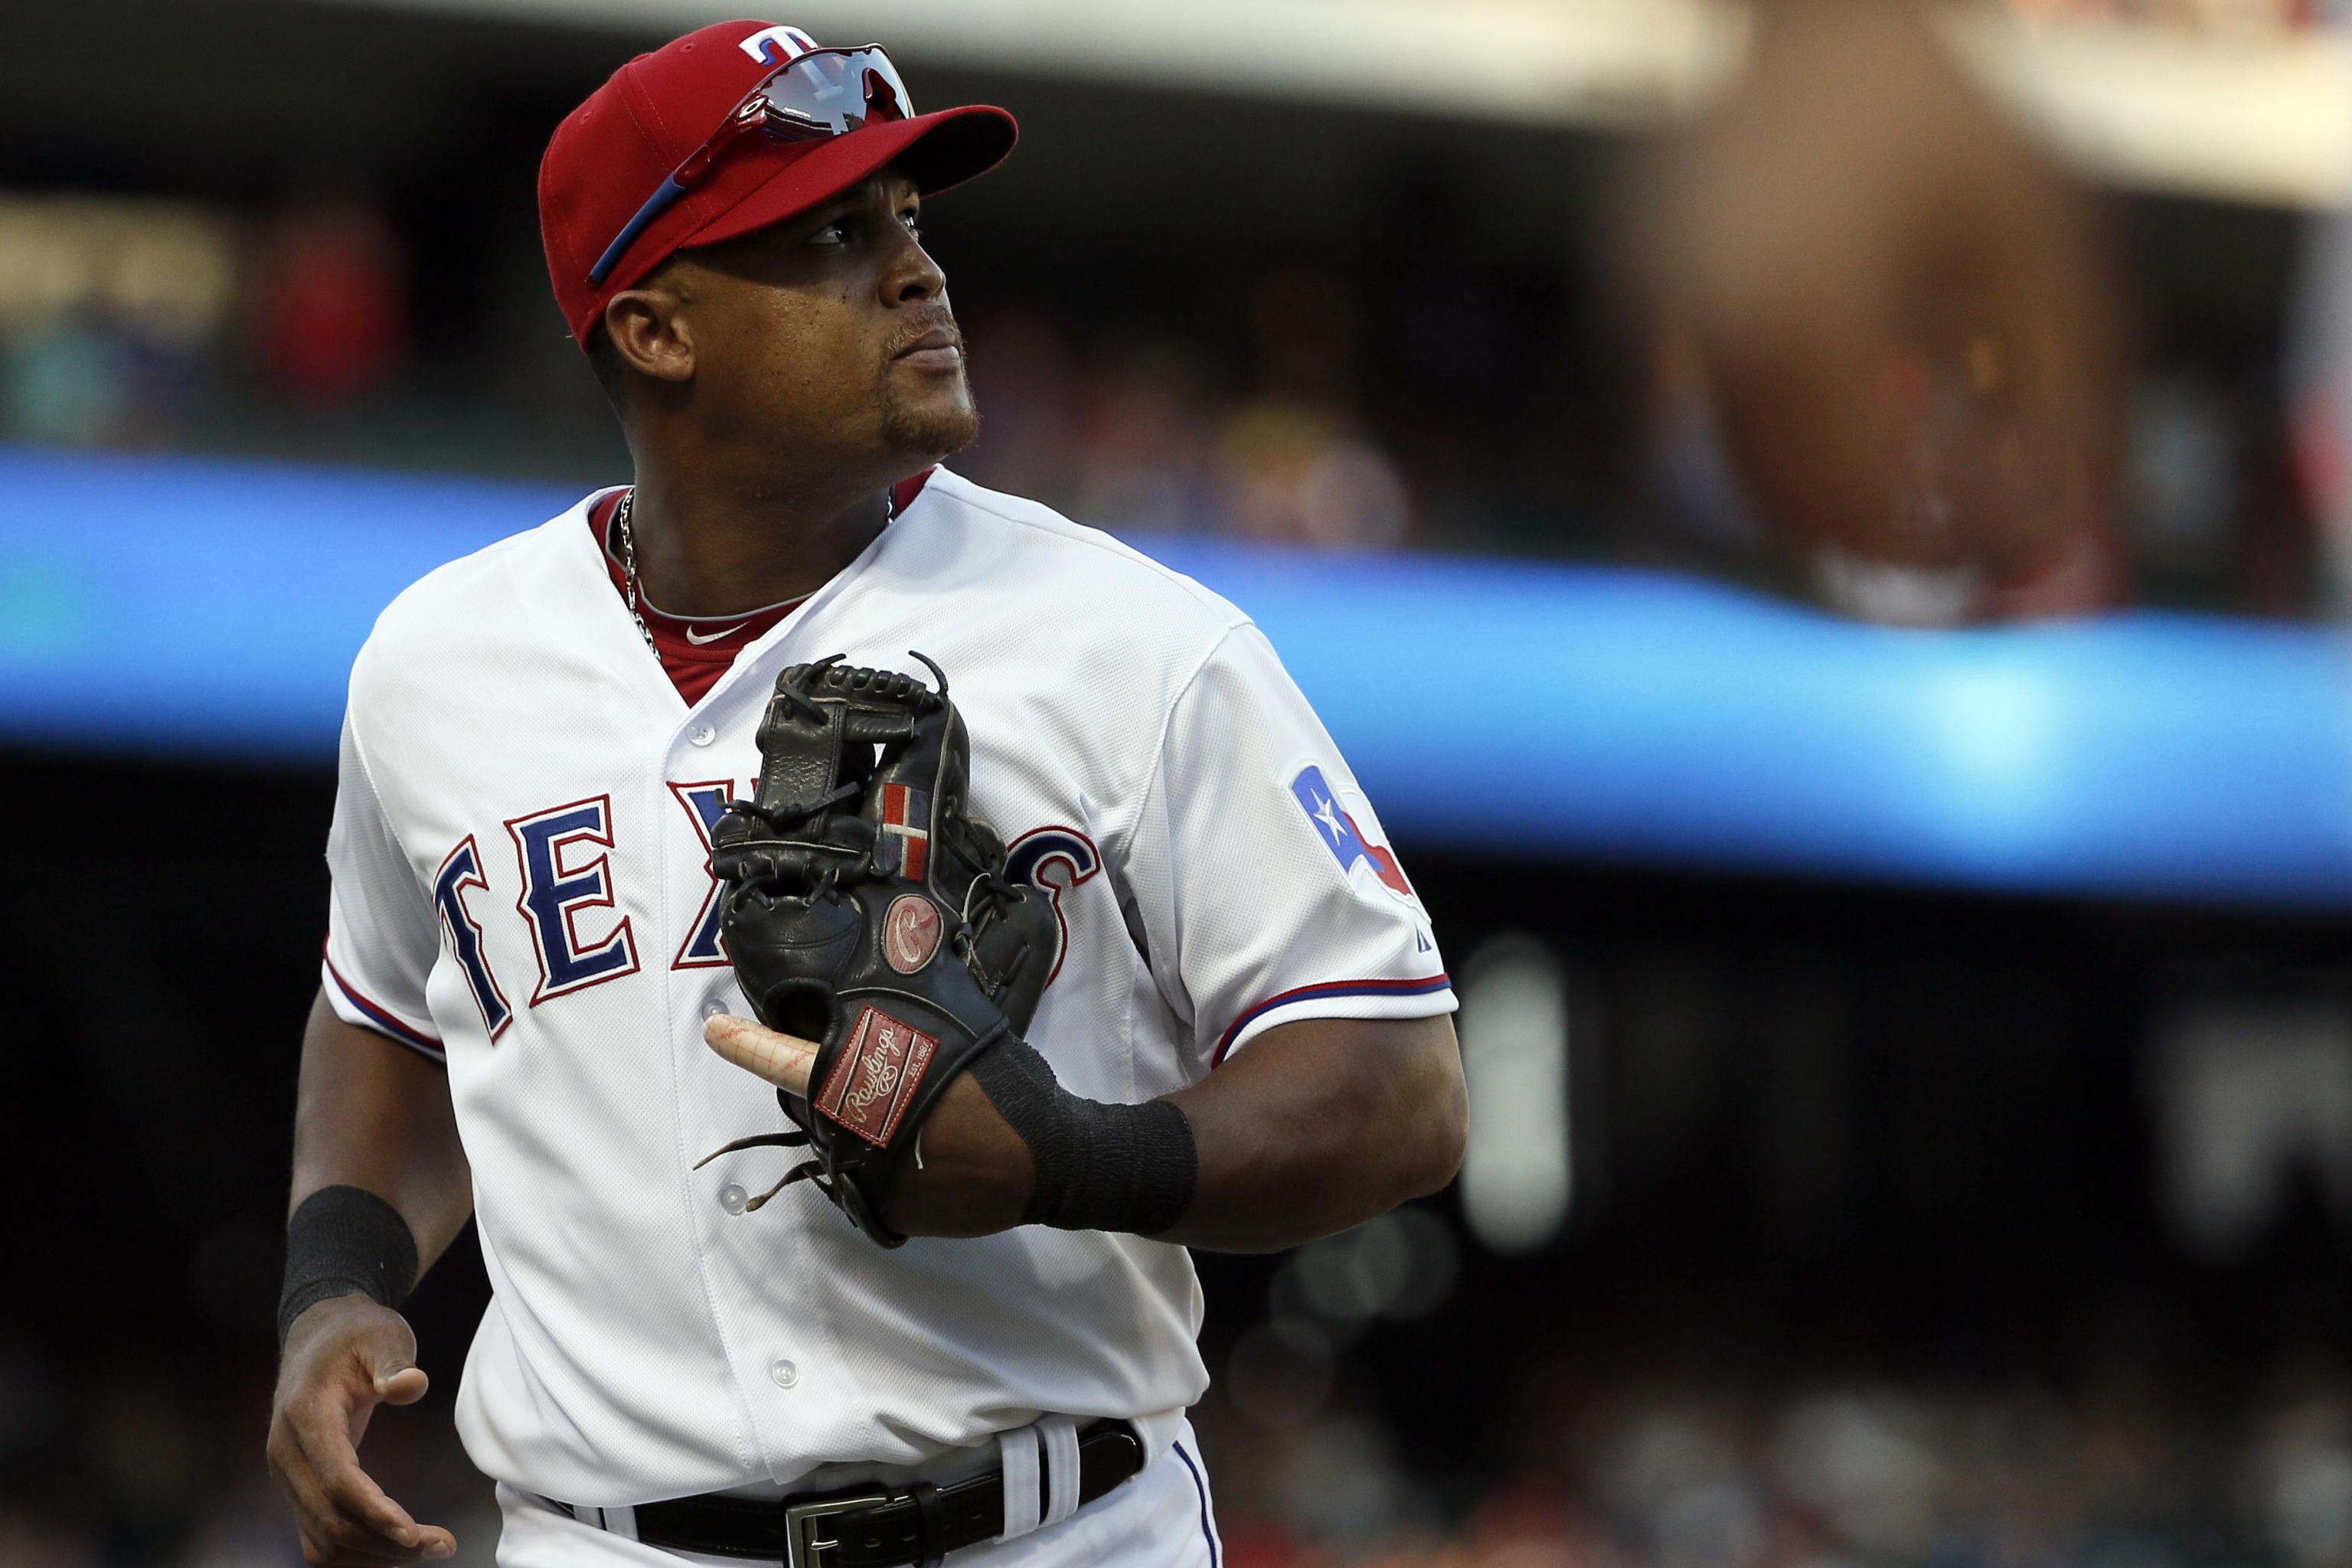 Was Adrian Beltre the right choice? - Beyond the Box Score